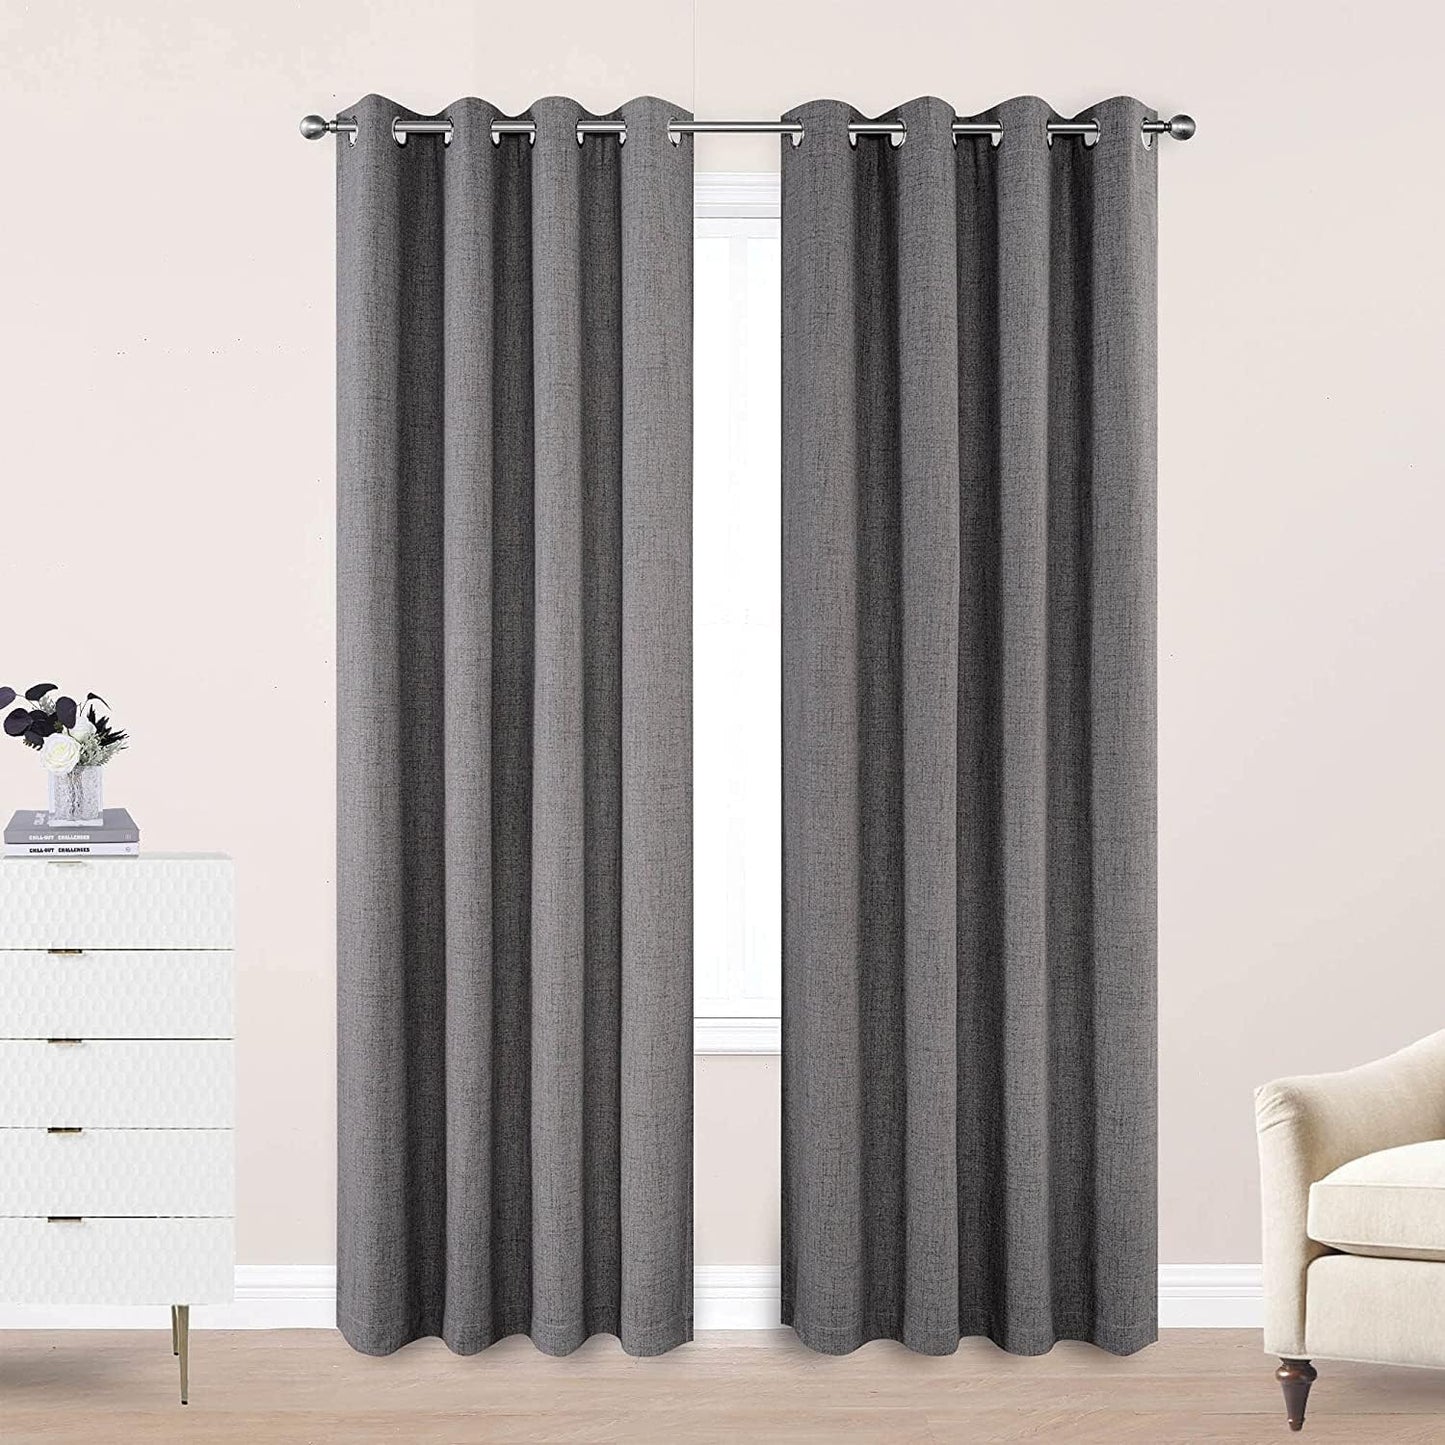 CUCRAF Full Blackout Window Curtains 84 Inches Long,Faux Linen Look Thermal Insulated Grommet Drapes Panels for Bedroom Living Room,Set of 2(52 X 84 Inches, Light Khaki)  CUCRAF Grey 52 X 108 Inches 